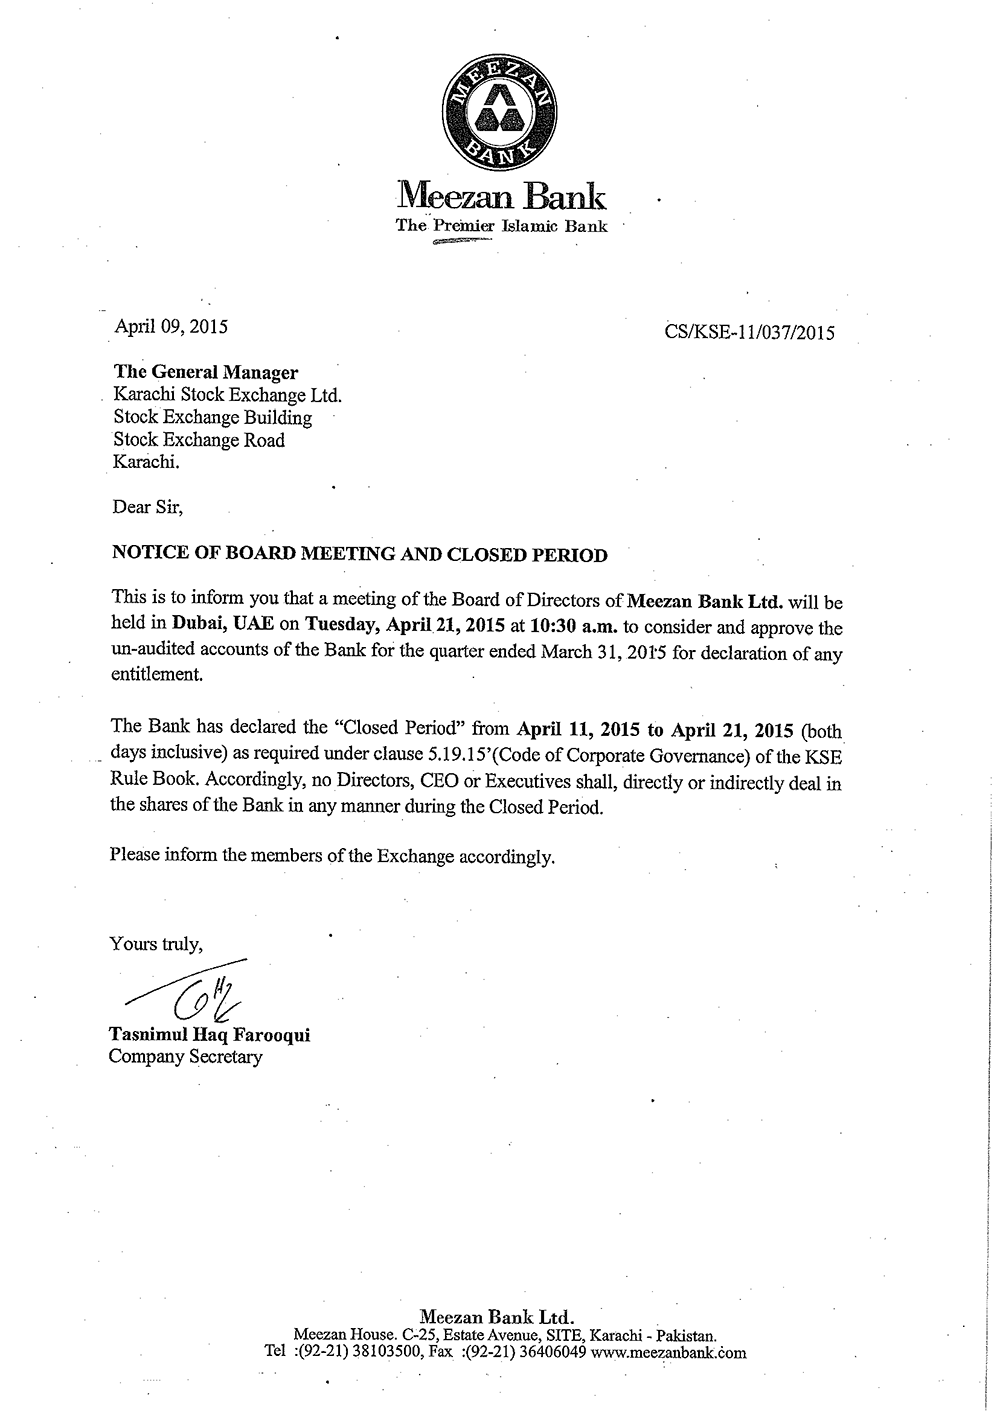 Notice of Board Meeting and Closed Period 2015